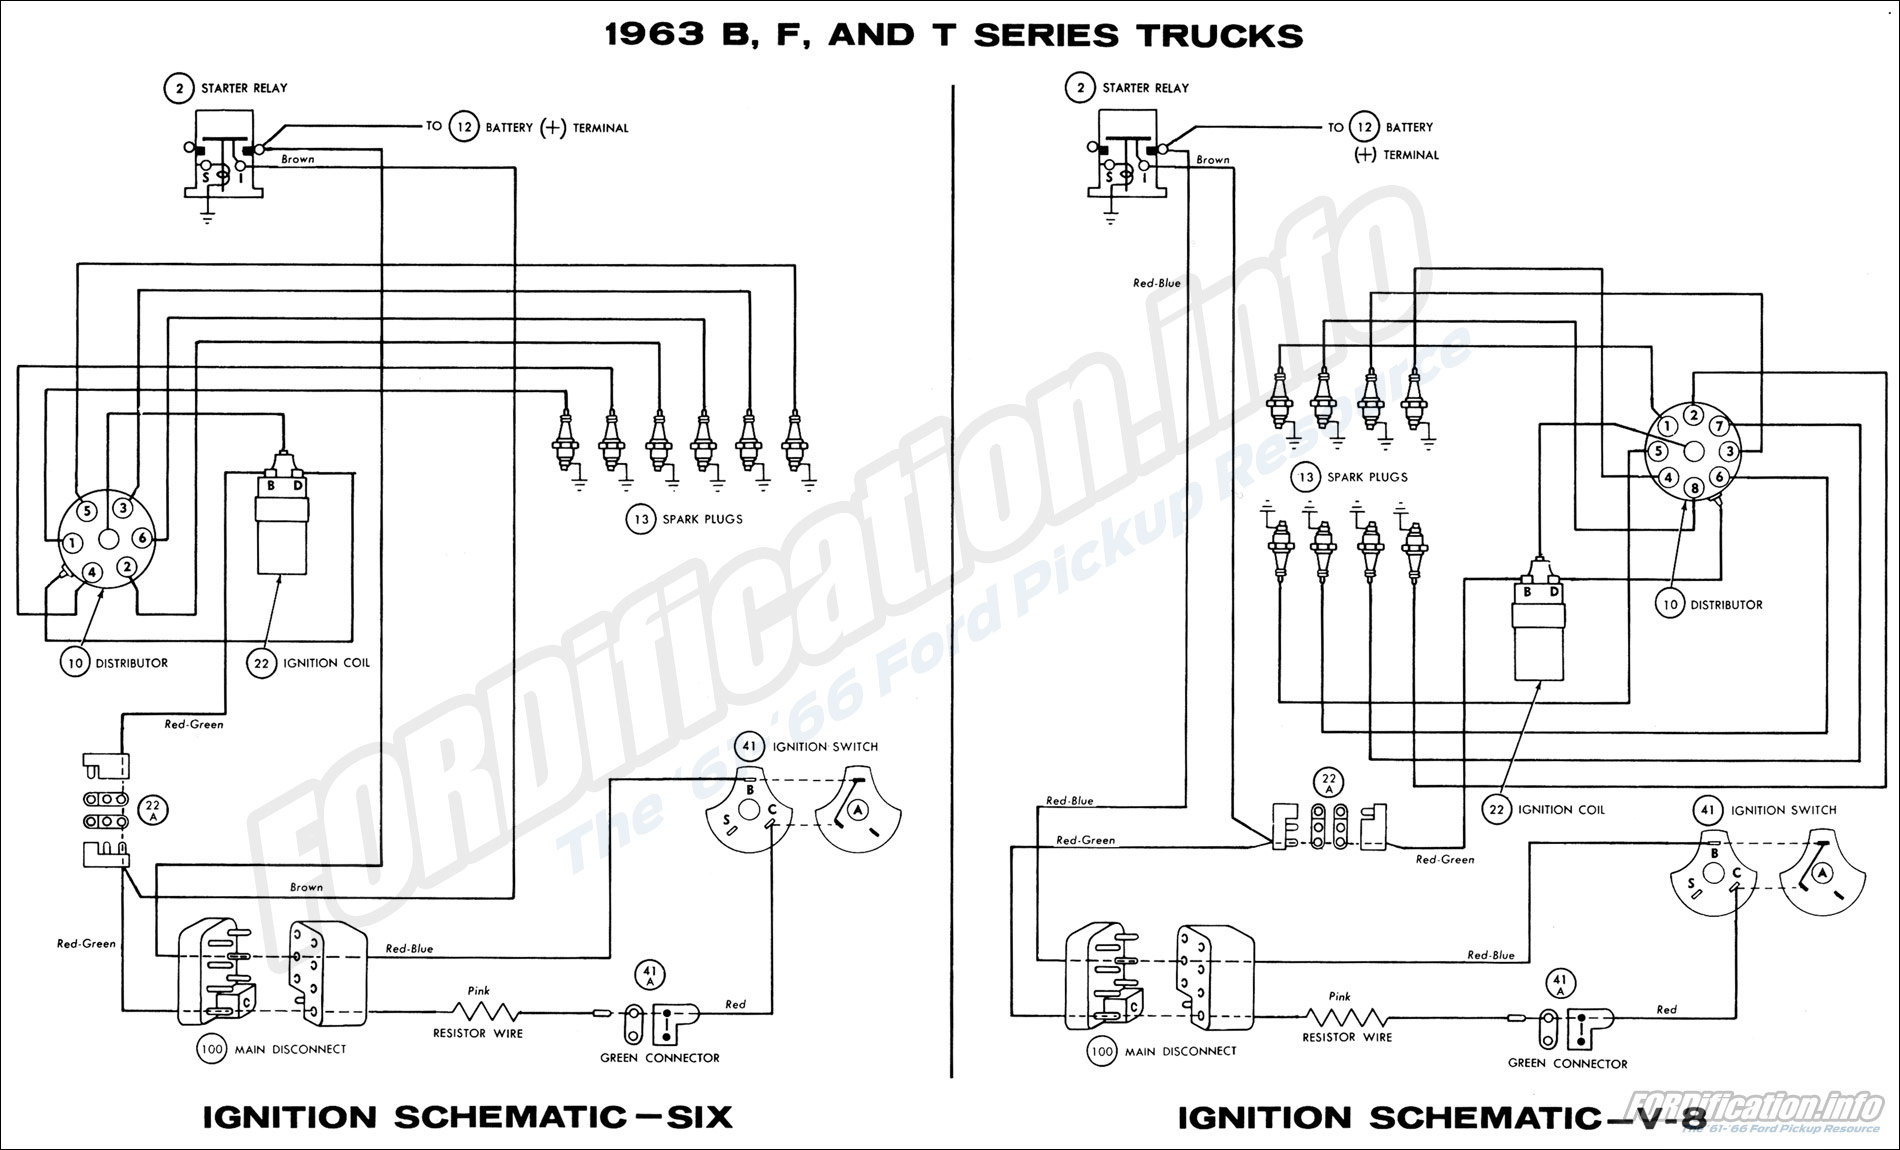 Starter solenoid and ignition wiring - Ford Truck Enthusiasts Forums